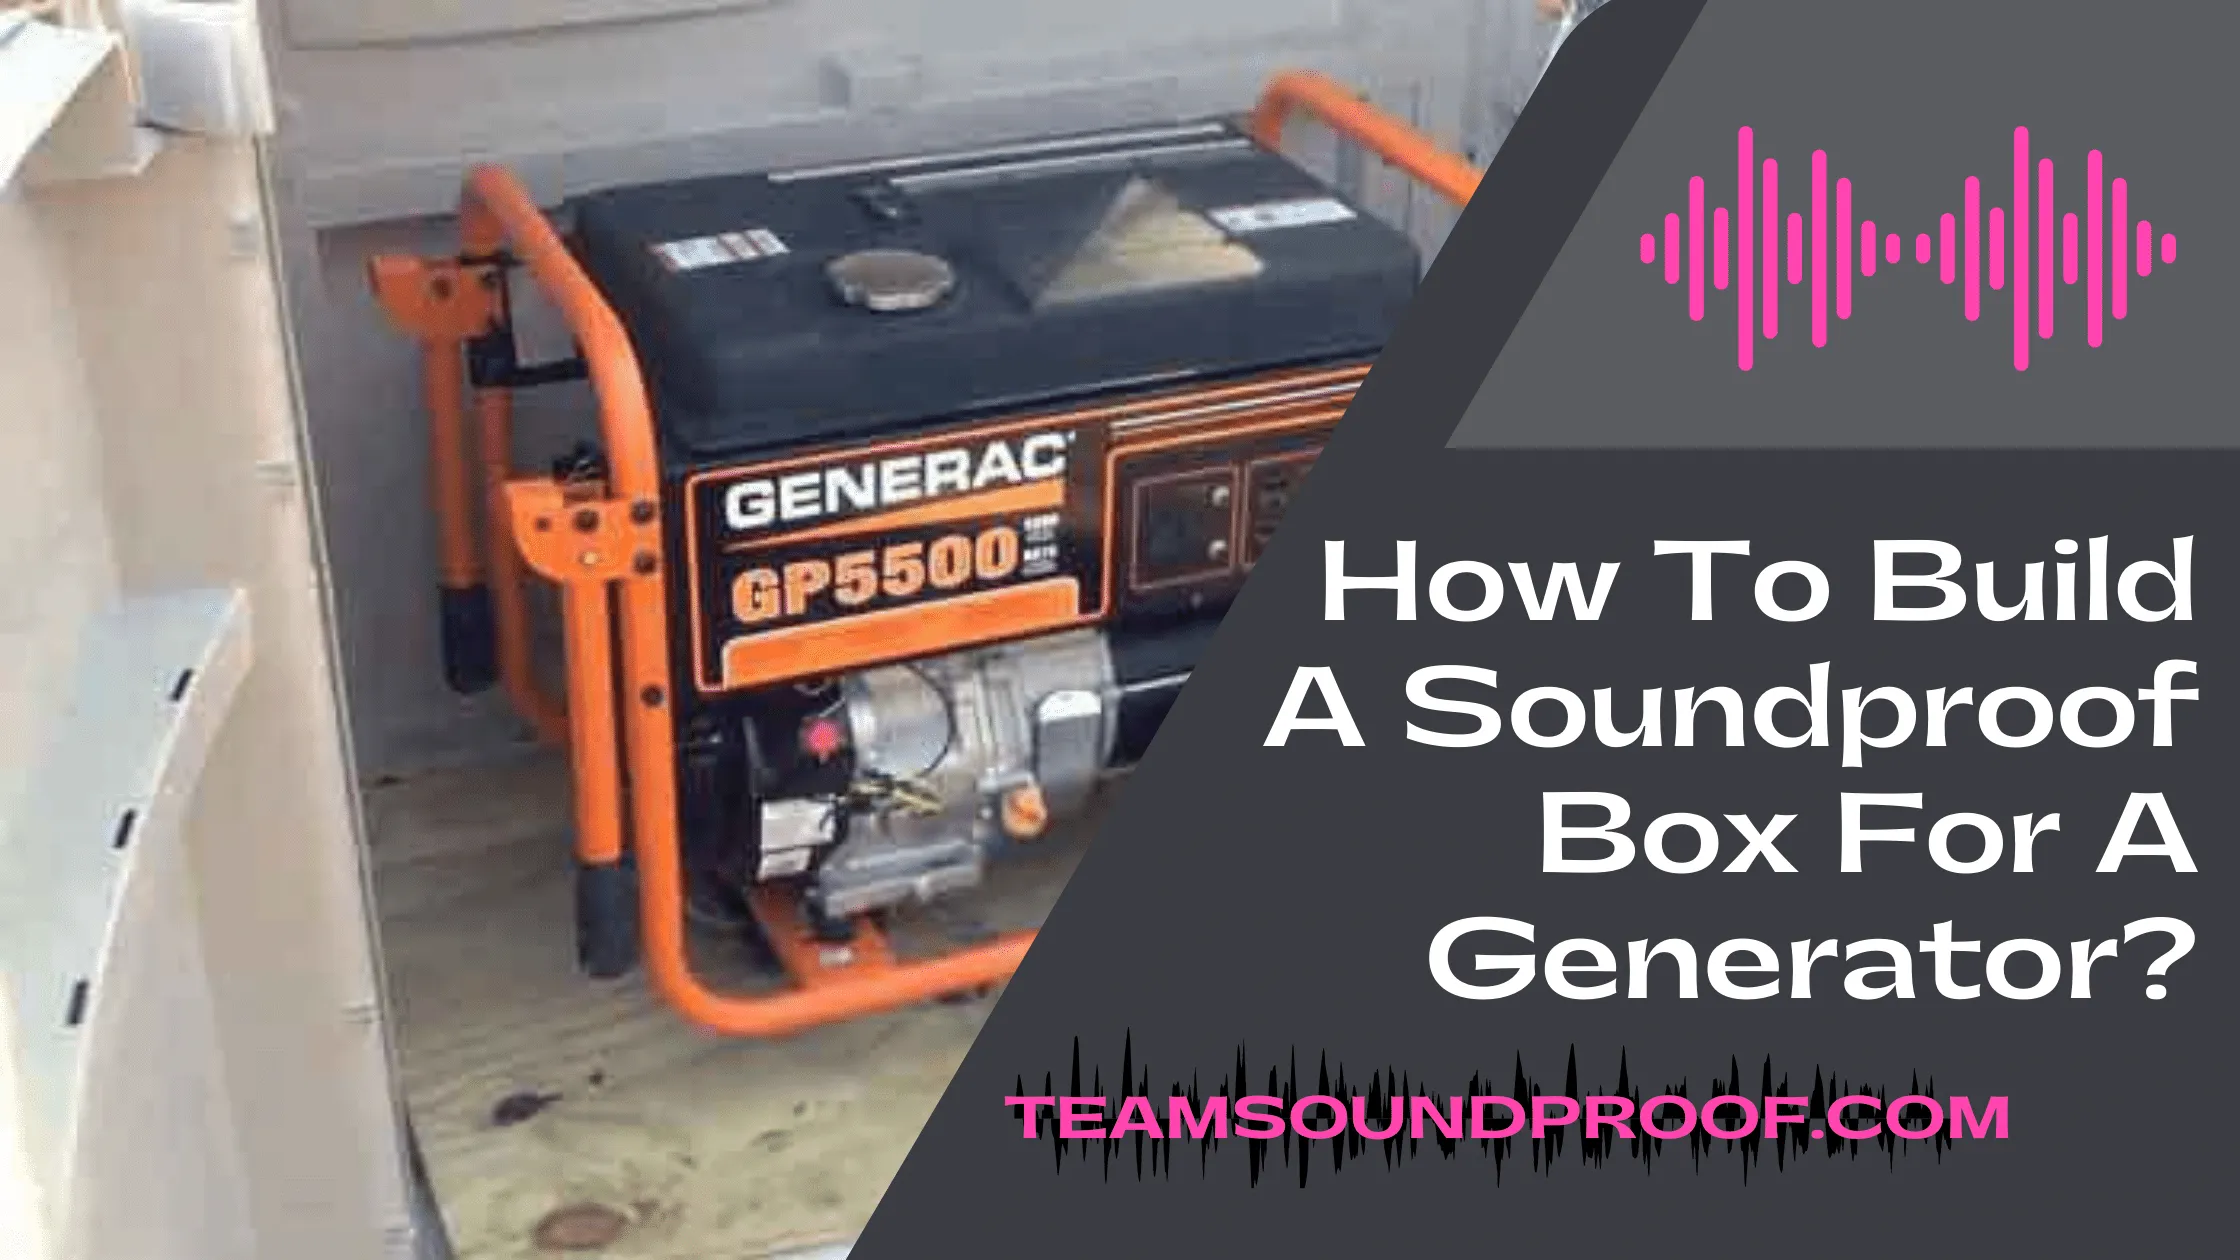 How To Build A Soundproof Box For A Generator? - #1 Guide